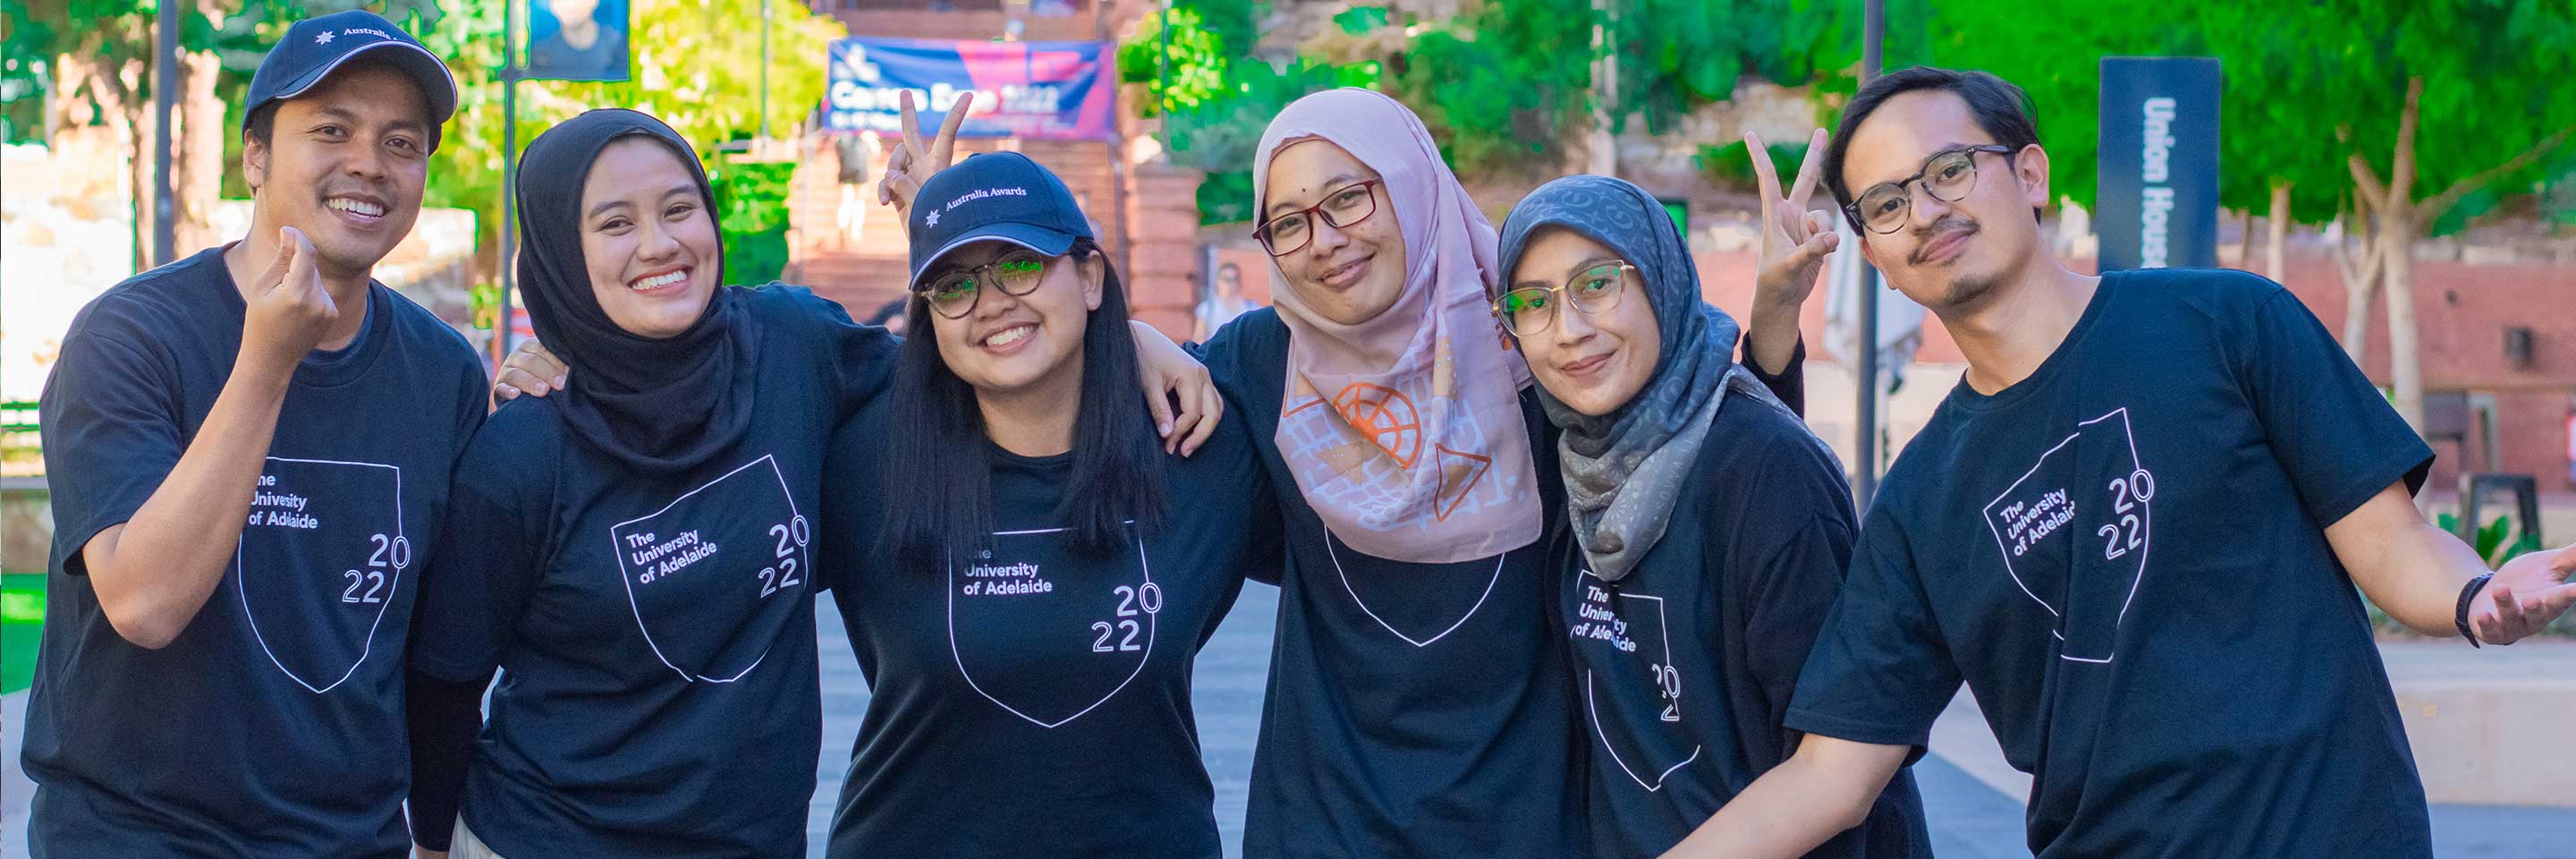 Scholarship recipients of the Split-Site Masters Program (SSMP) enjoy their time together in Australia. Through the SSMP, these change agents are able to spend a year studying at a university in Indonesia, and another year at a university in Australia.